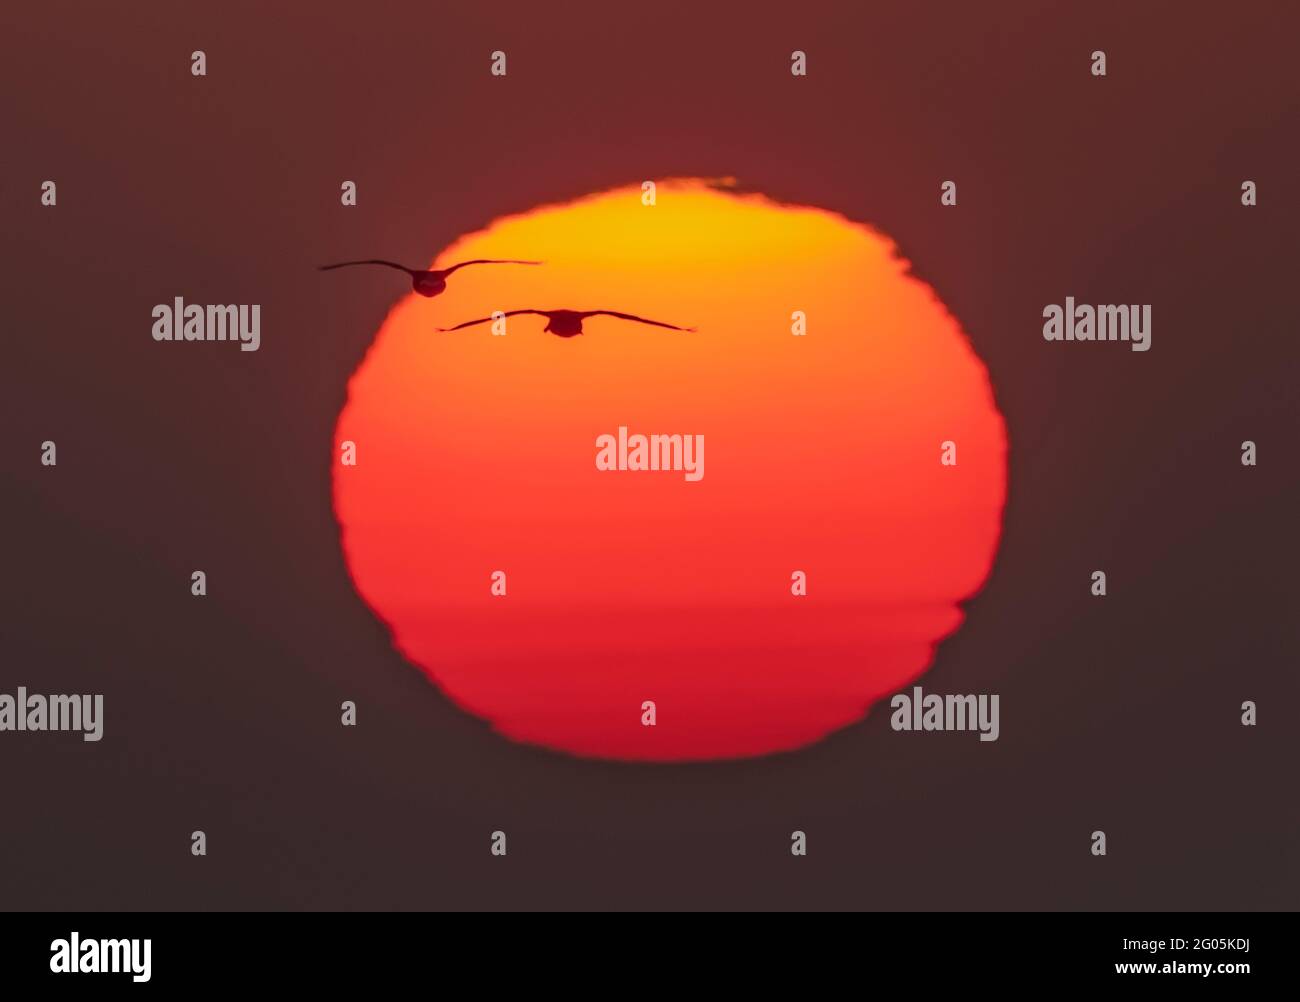 Wimbledon, London, UK. 1 June 2021. The rising sun contorts in shapes as it moves through thick layers of atmosphere near the horizon over London before it begins a day of mini heatwave temperatures. A pair of seagulls are silhouetted against the star. Credit: Malcolm Park/Alamy Stock Photo